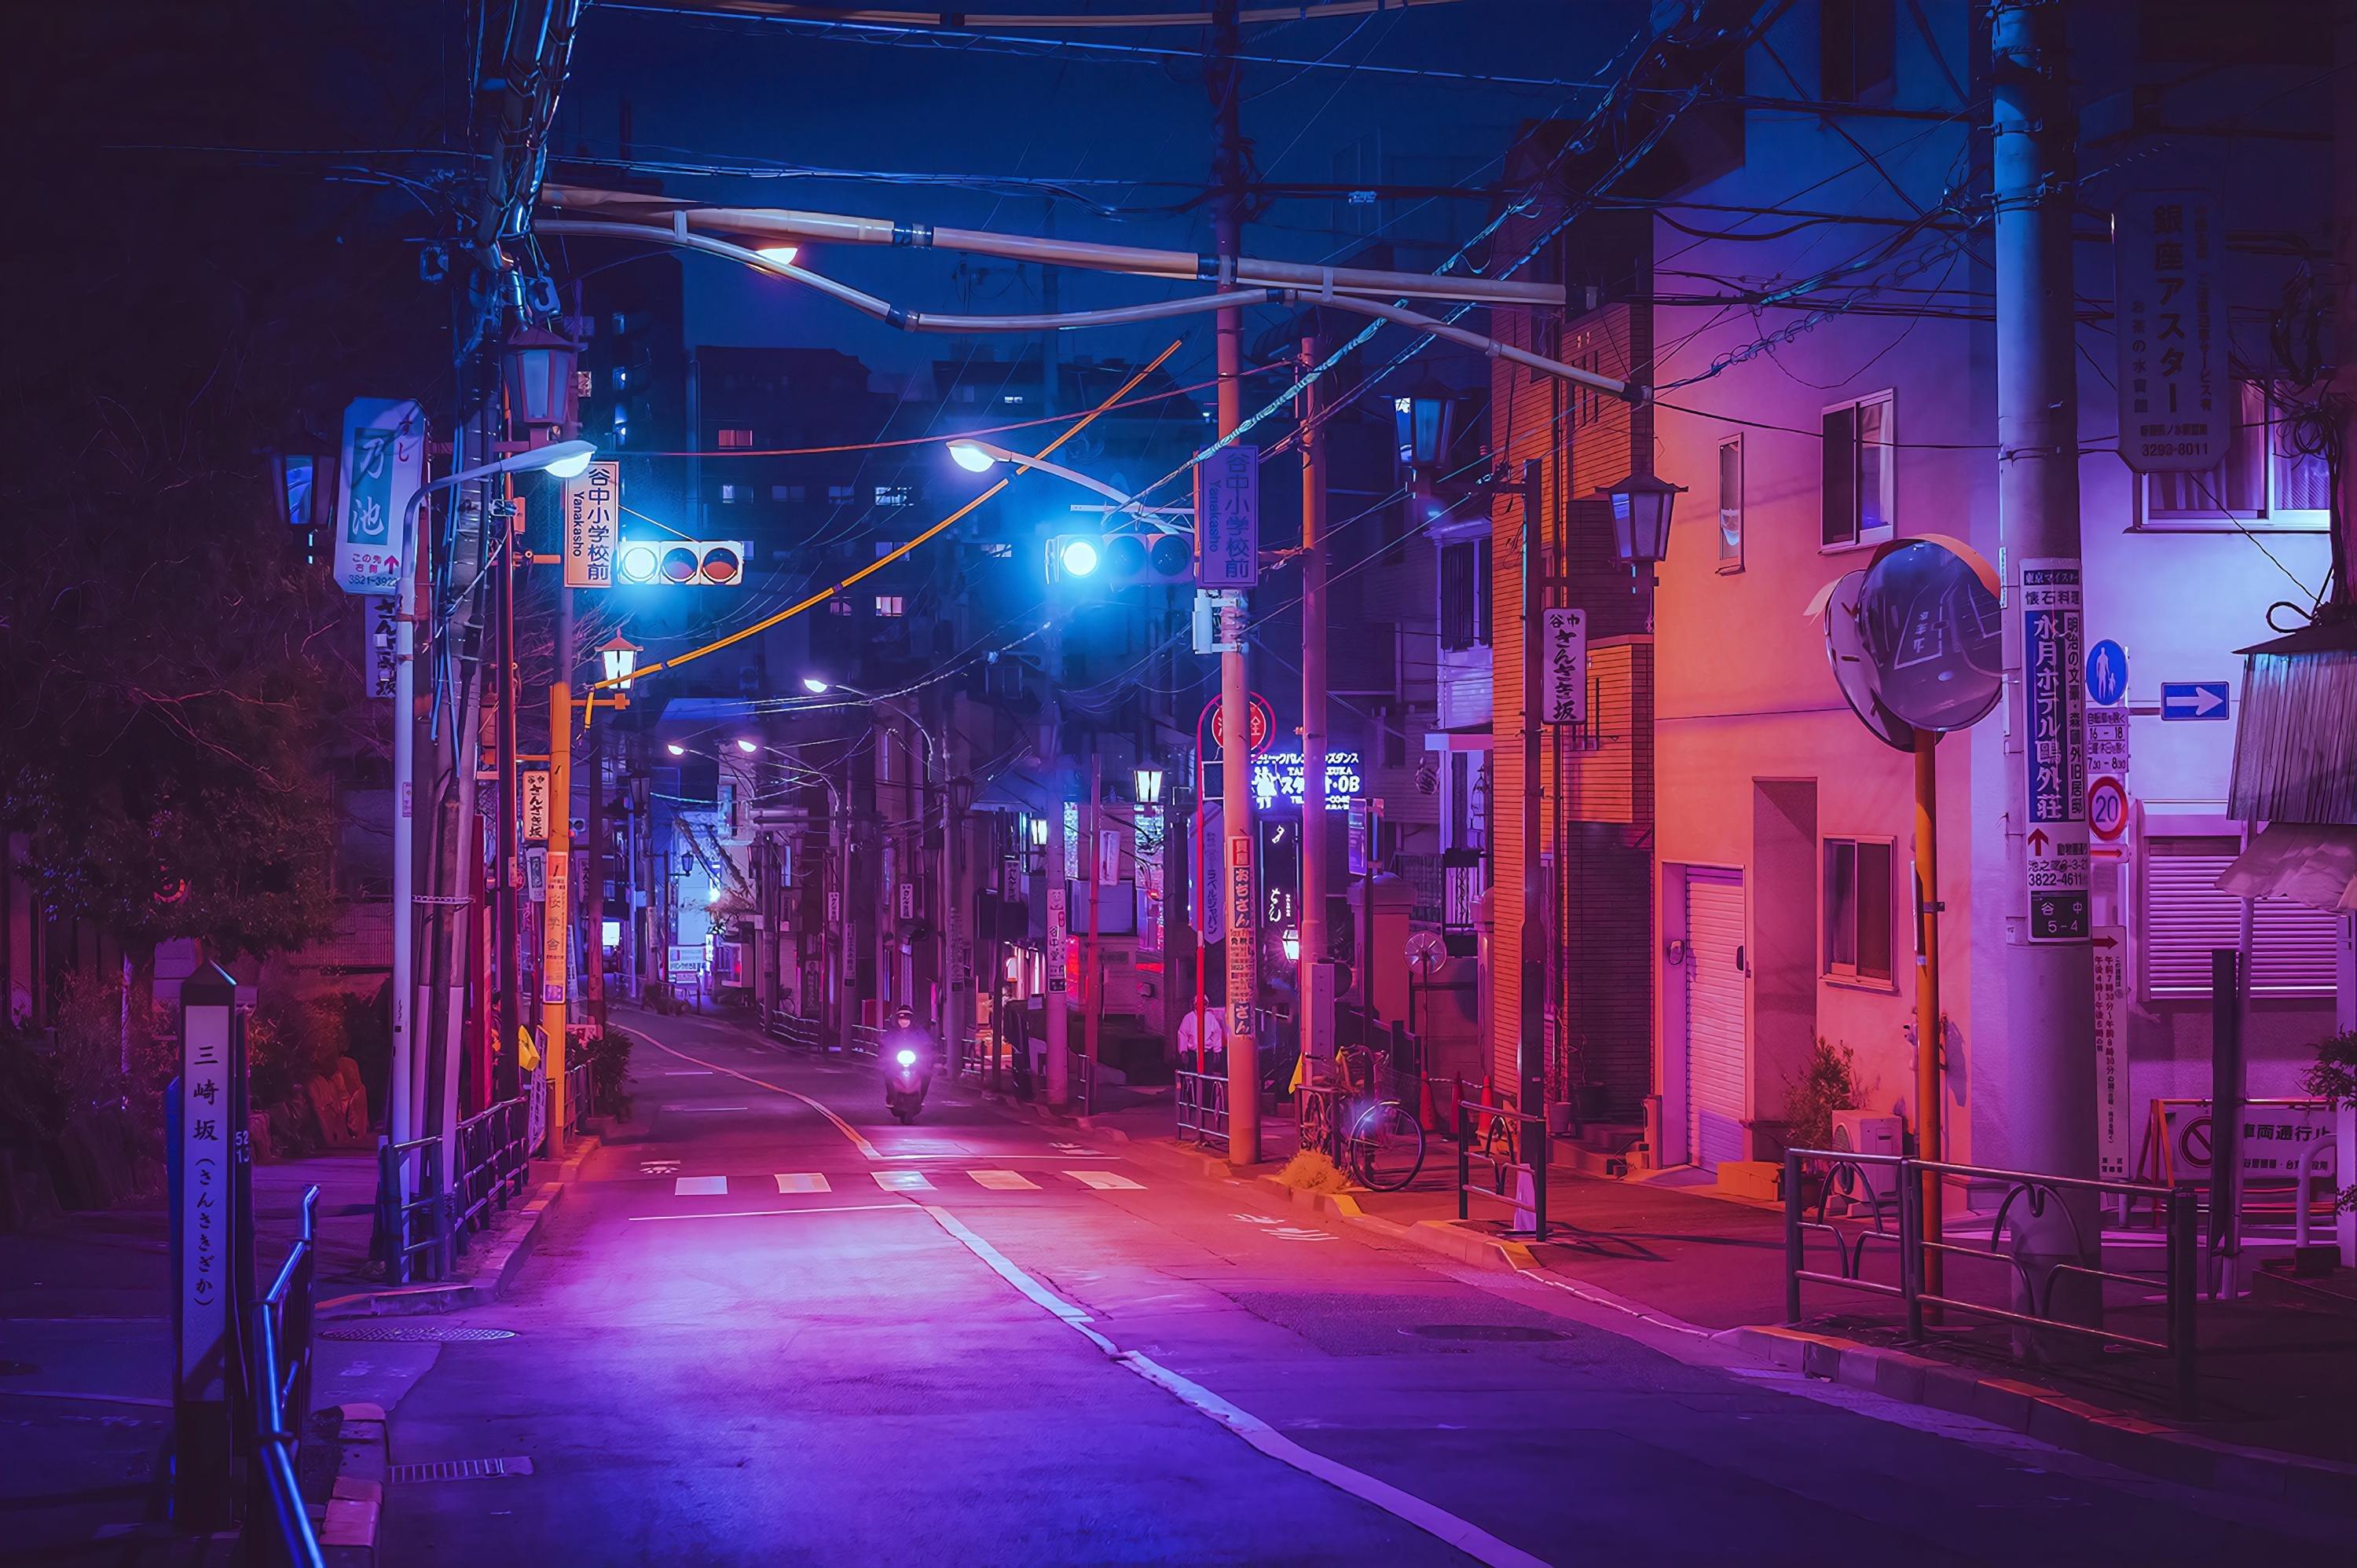 A street at night with purple and blue lights - City, night, road, anime city